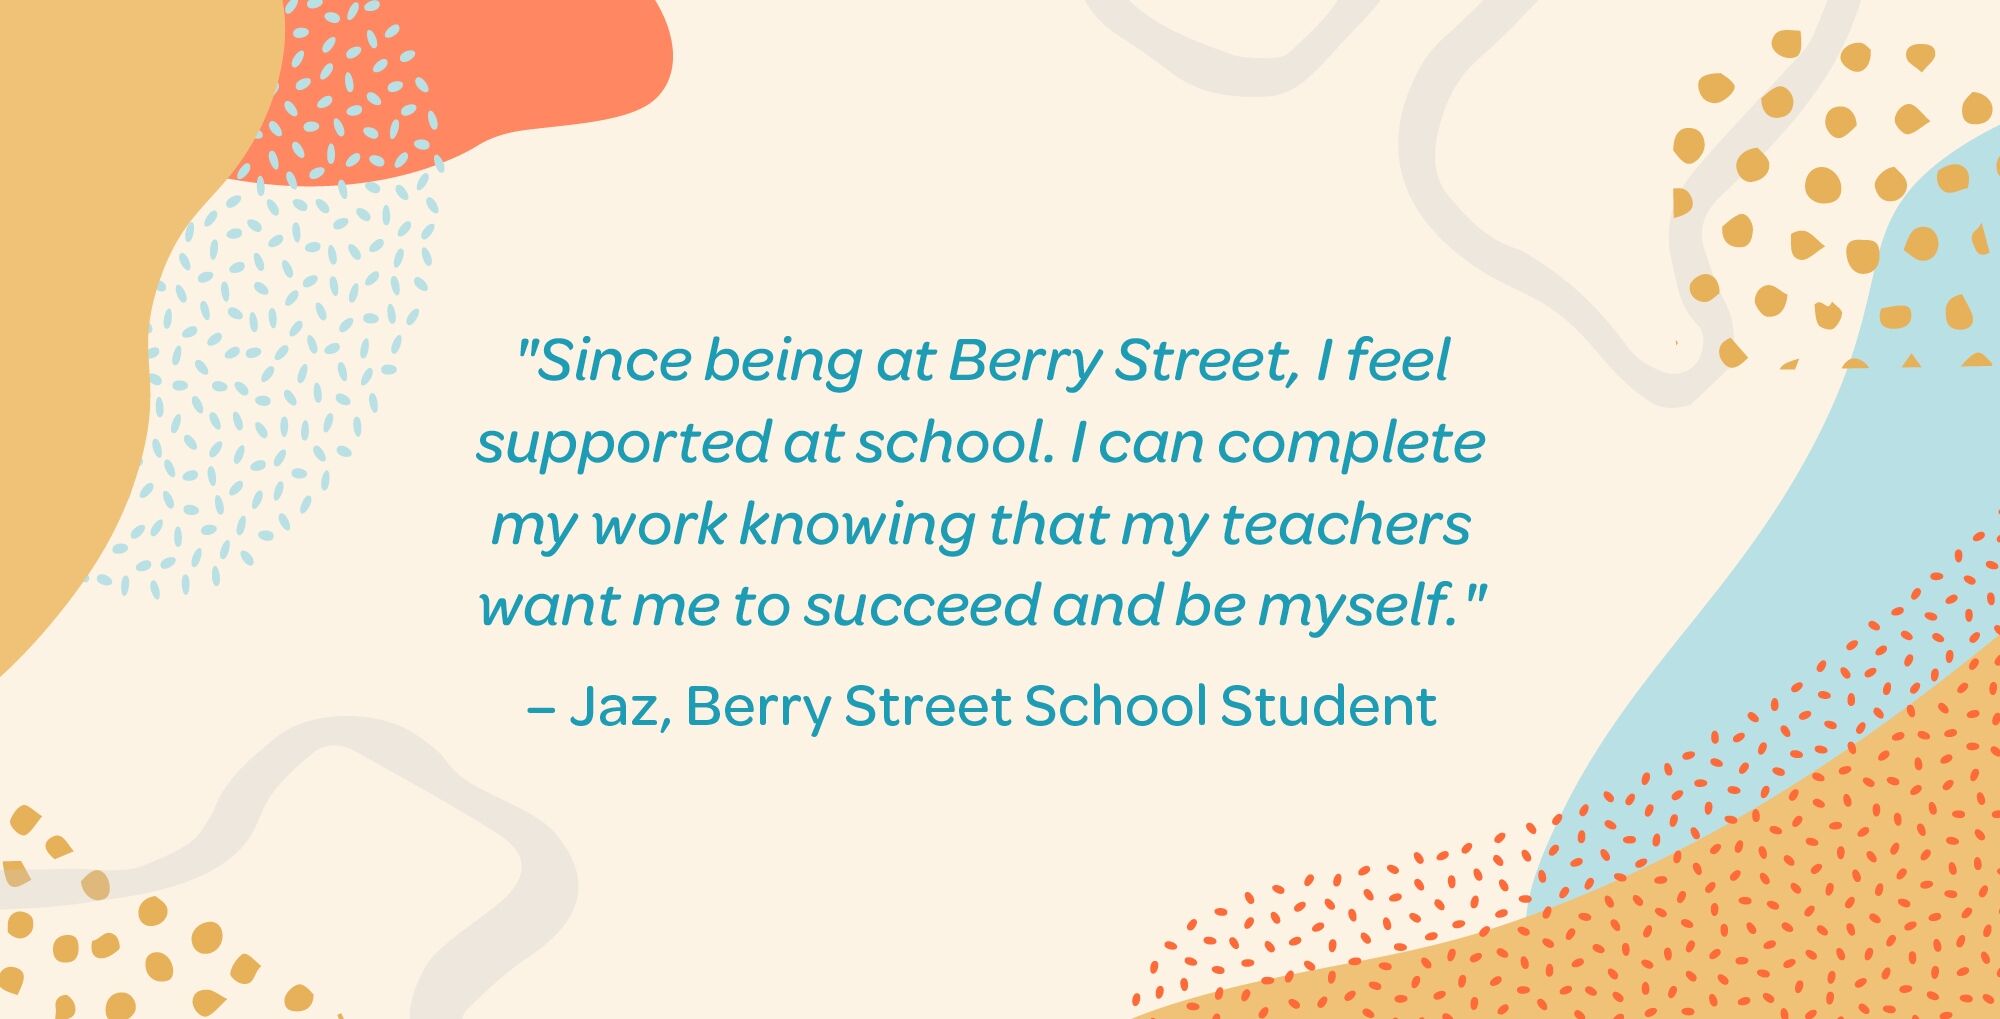 Since being at berry street, I feel supported at school. I can complete my work knowing that my teachers want me to succeed and be myself. Jaz Berry Street student